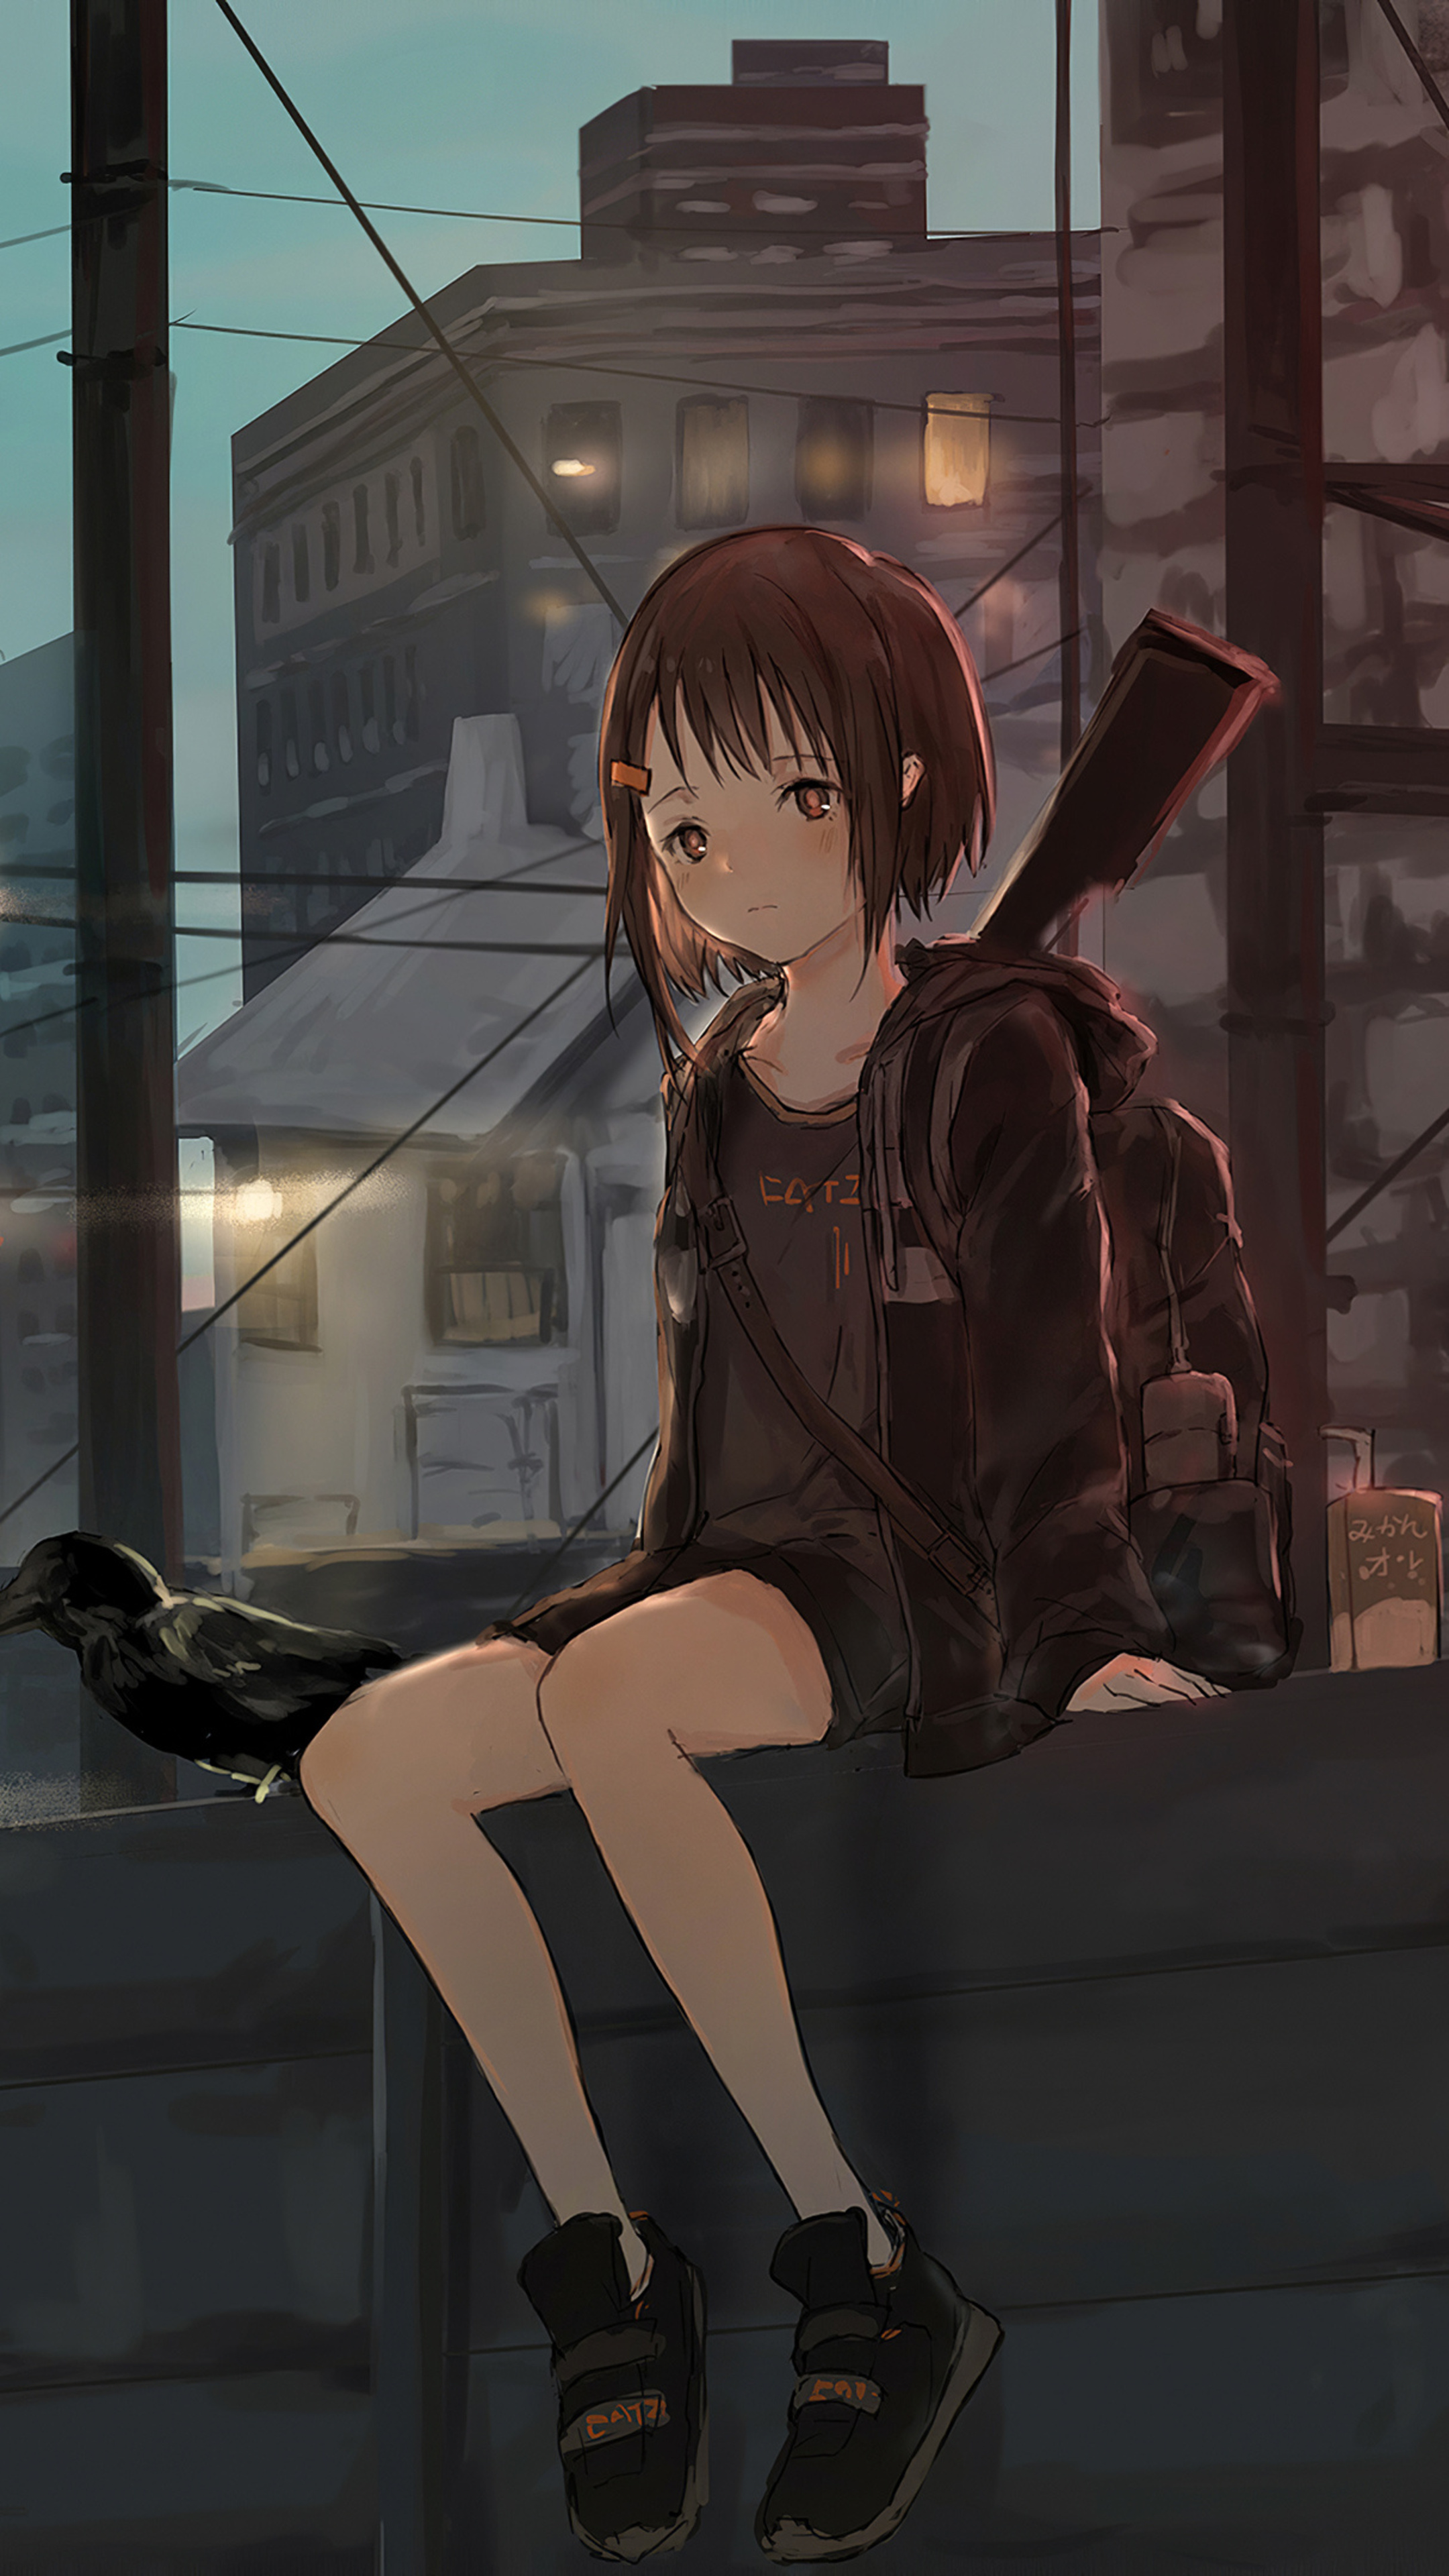 2160x3840 Anime Girl Sitting Alone Roof Sad 4k Sony Xperia X,XZ,Z5 Premium  HD 4k Wallpapers, Images, Backgrounds, Photos and Pictures